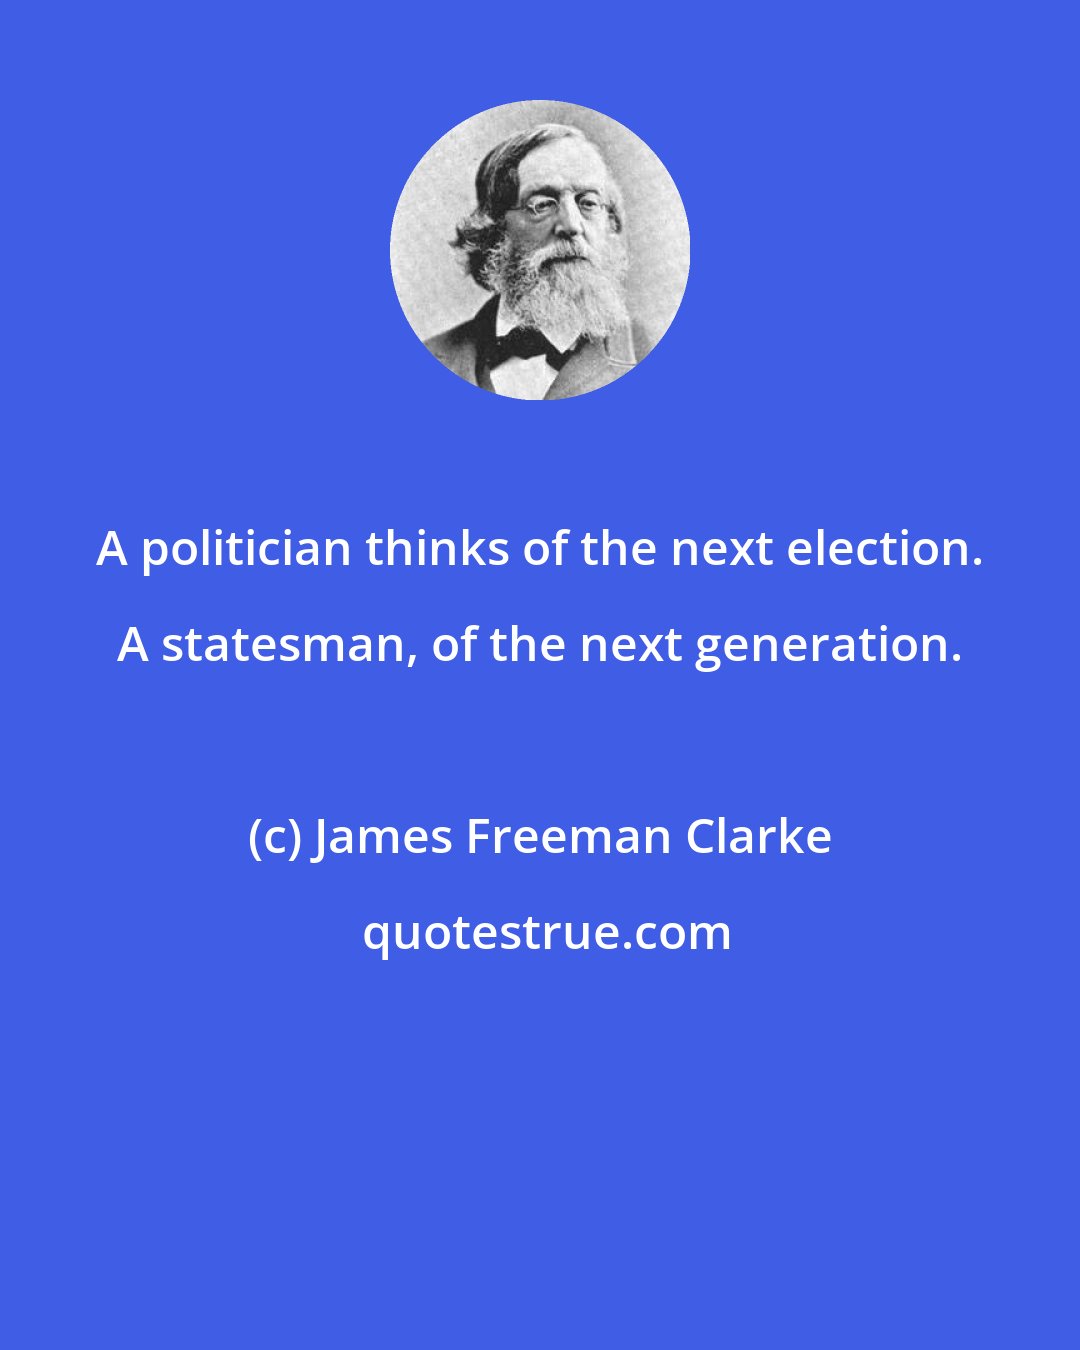 James Freeman Clarke: A politician thinks of the next election. A statesman, of the next generation.